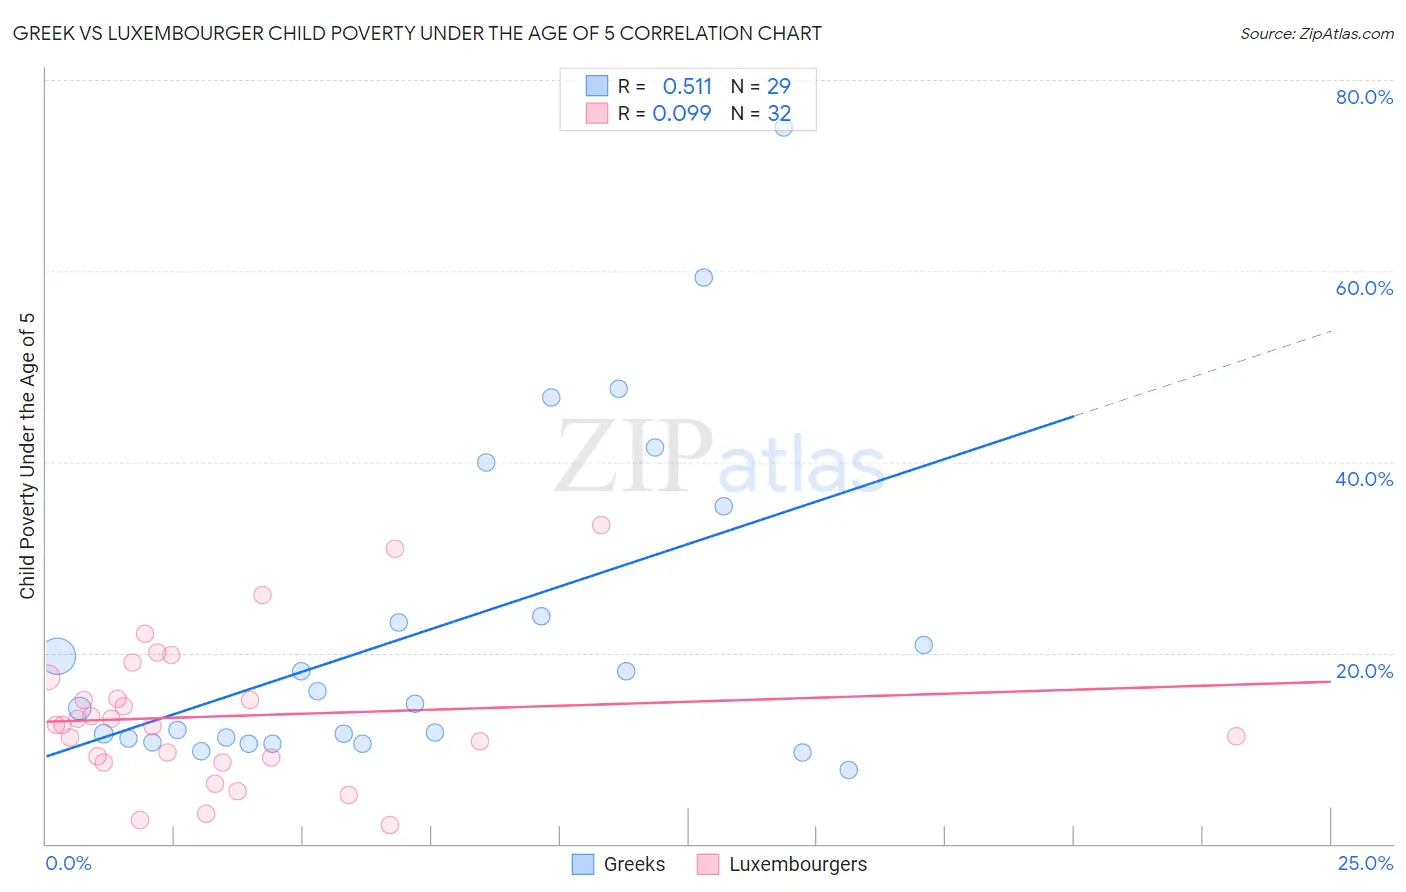 Greek vs Luxembourger Child Poverty Under the Age of 5